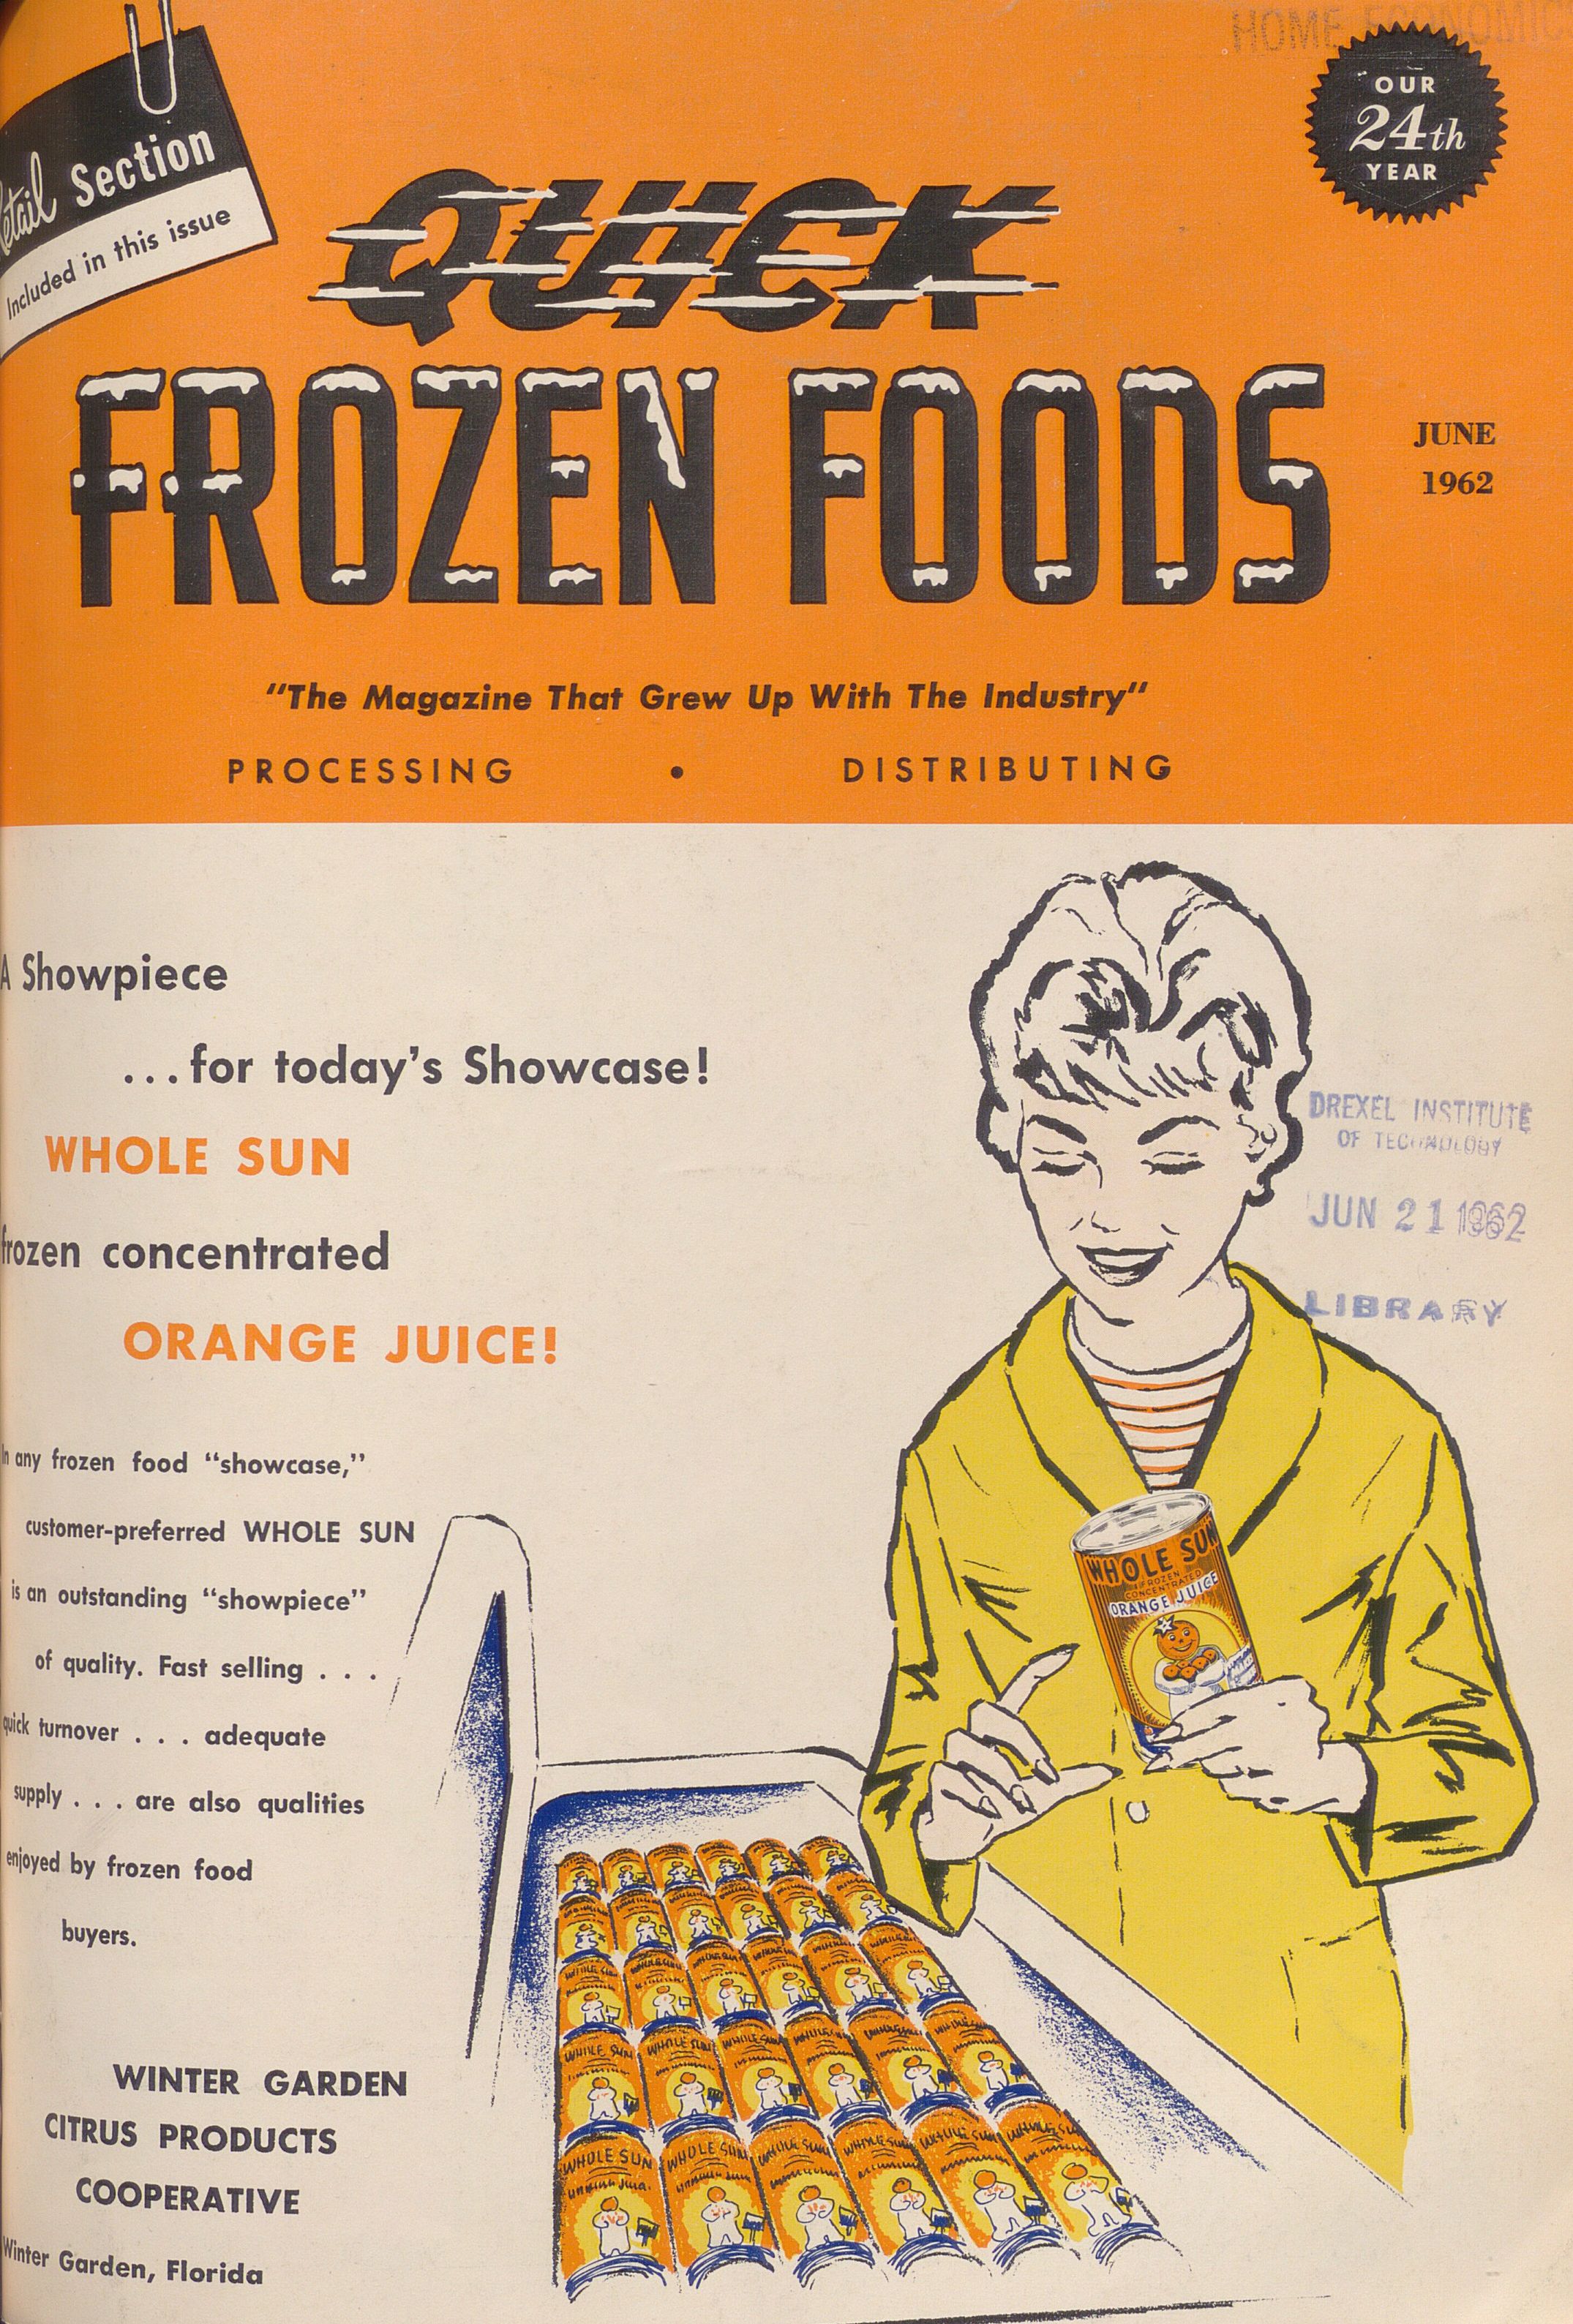 Front cover of Quick Frozen Foods, 1962. Content compilation © 2019, by the Hagley Museum & Library. All rights reserved.